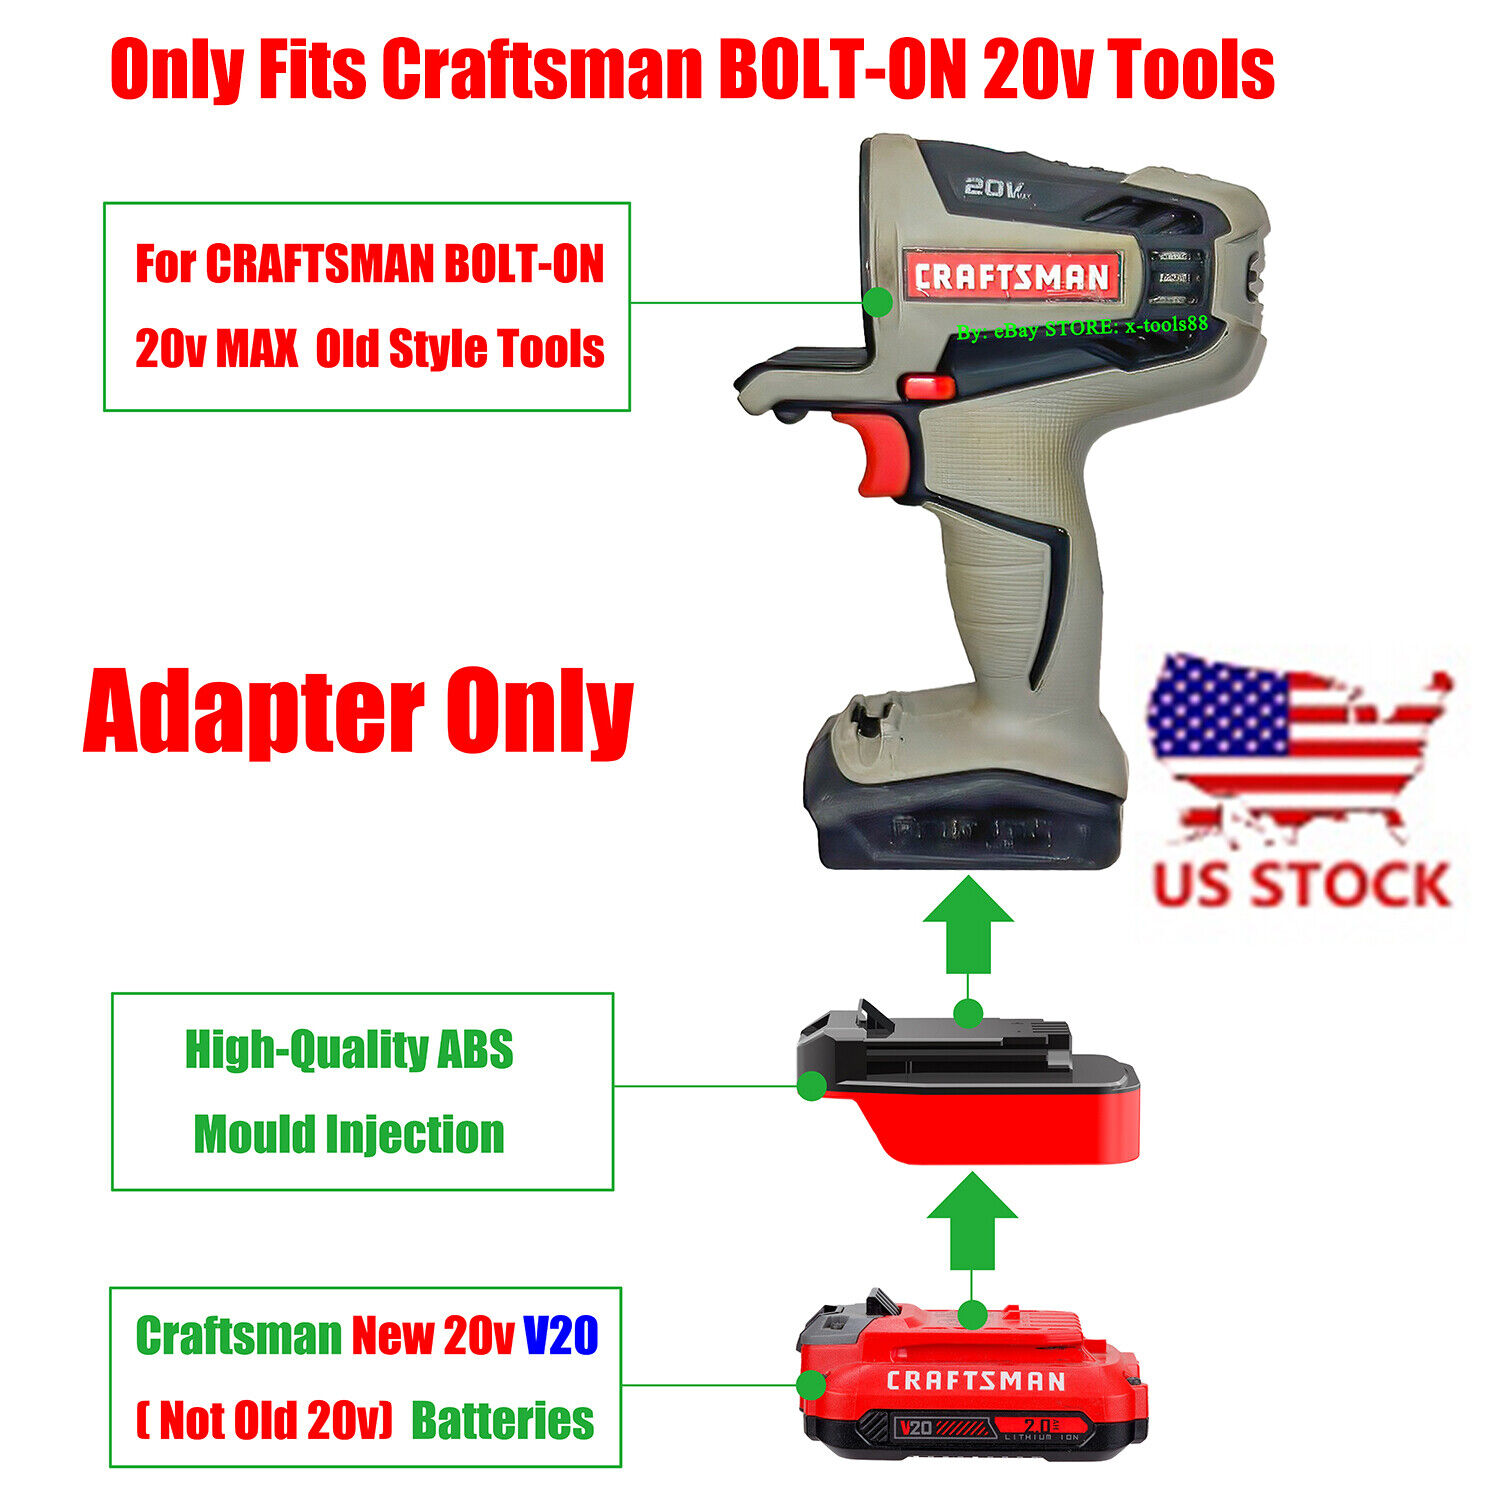 1x Adapter Fits Craftsman V20 NEW 20v Battery To Bolt-On 20v MAX Old Style Tools